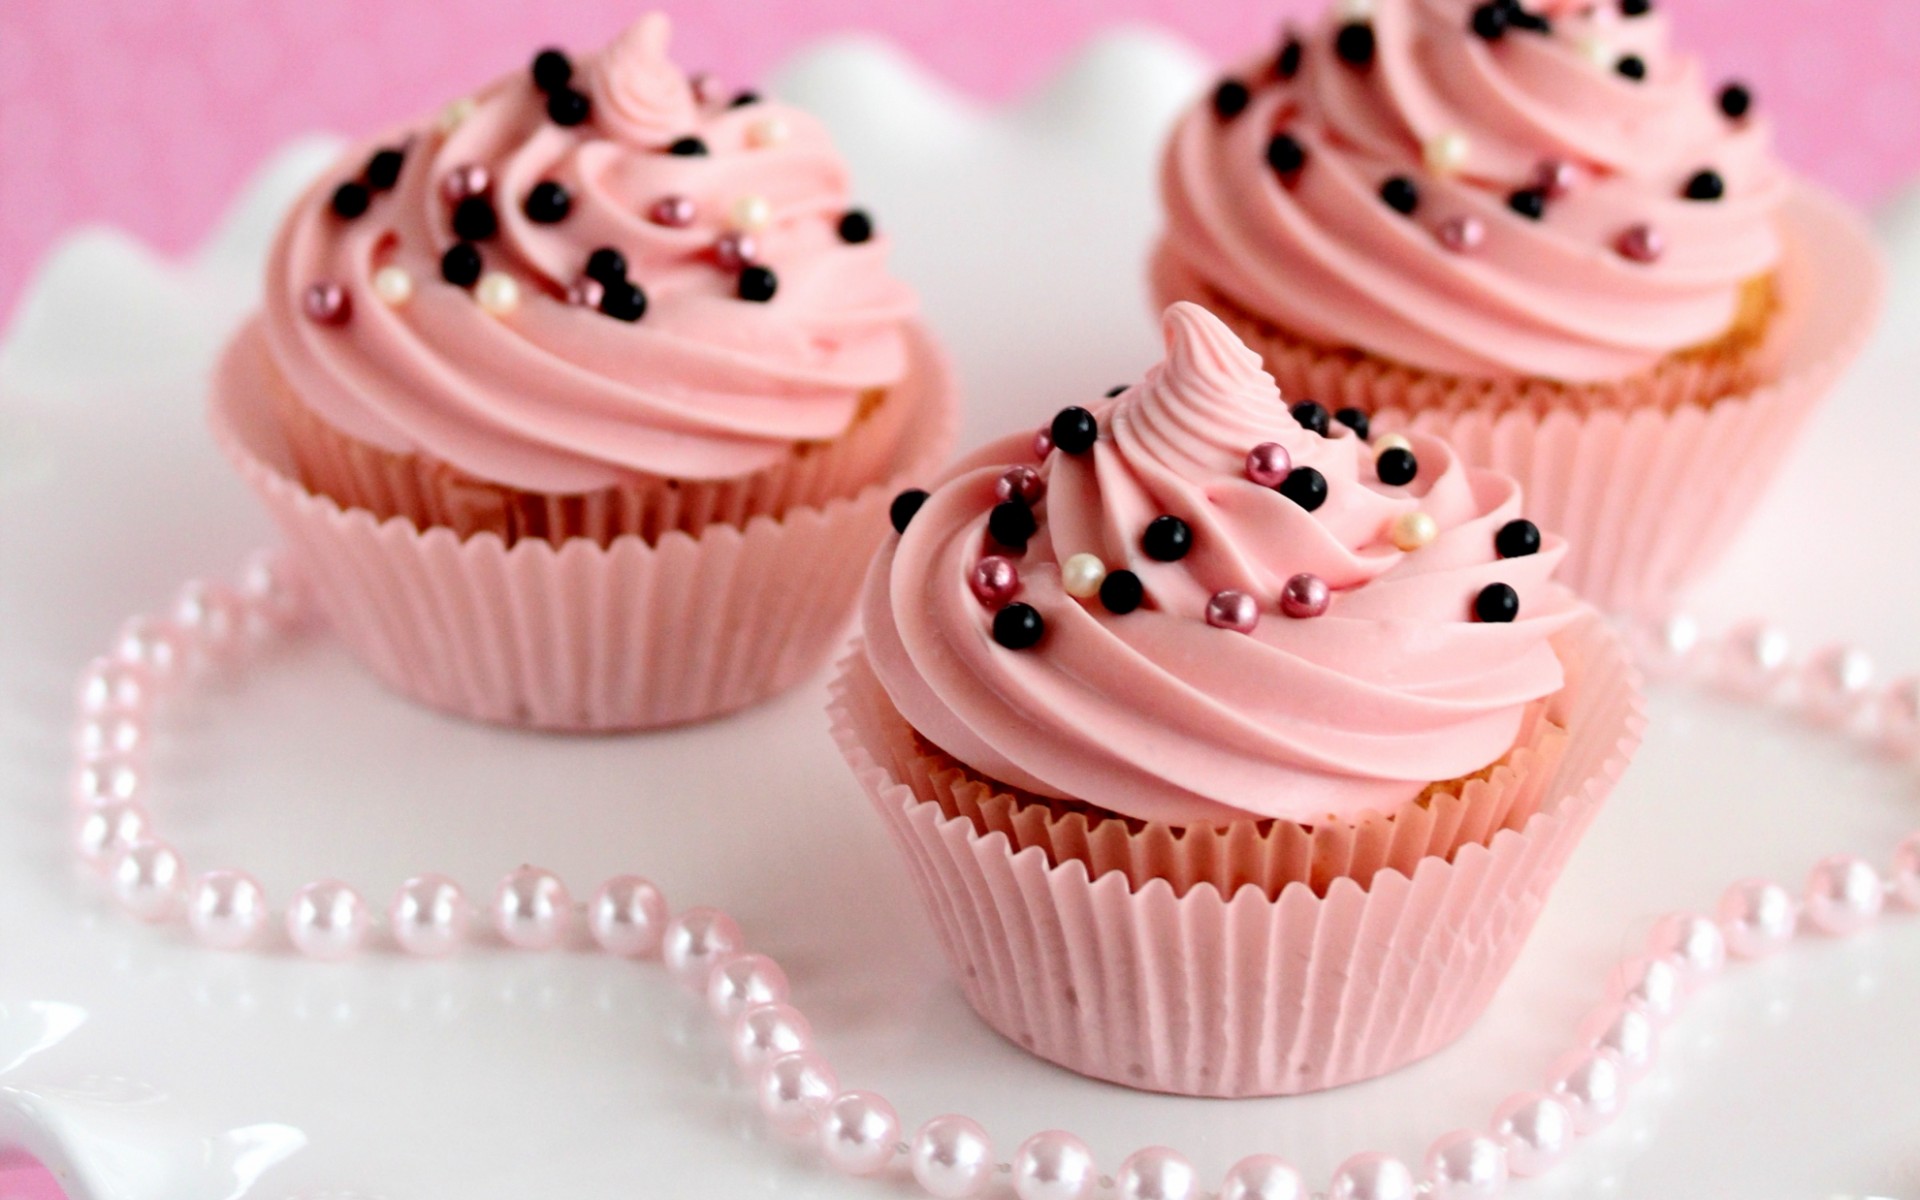 Food Images Cupcakes Hd Wallpaper And Background Photos HD Wallpapers Download Free Images Wallpaper [wallpaper981.blogspot.com]